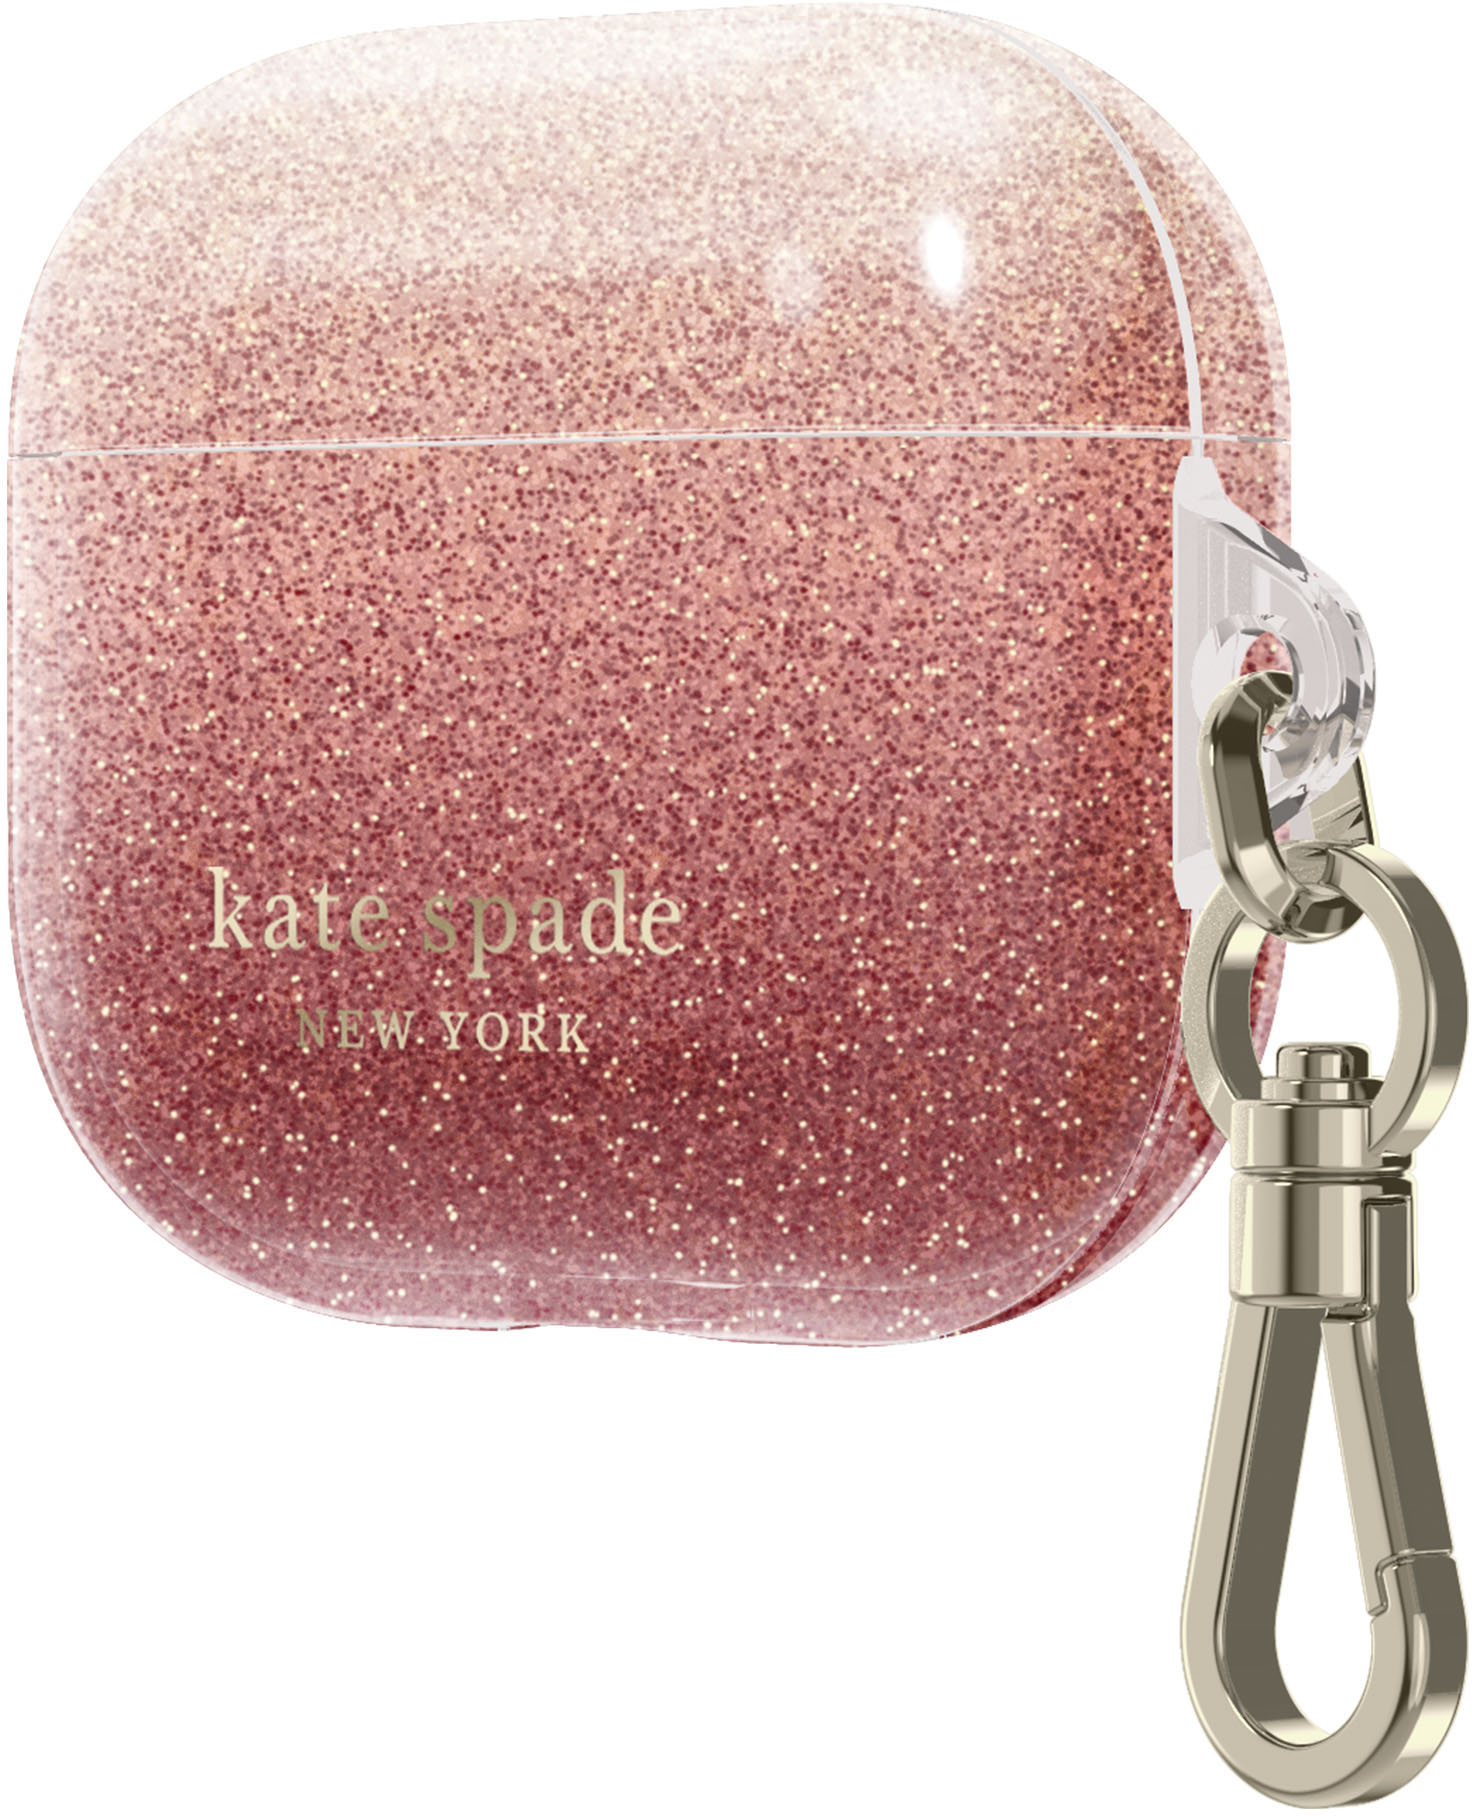 Angle View: kate spade new york - Protective AirPods (3rd Generation) Case - Sunset Glitter